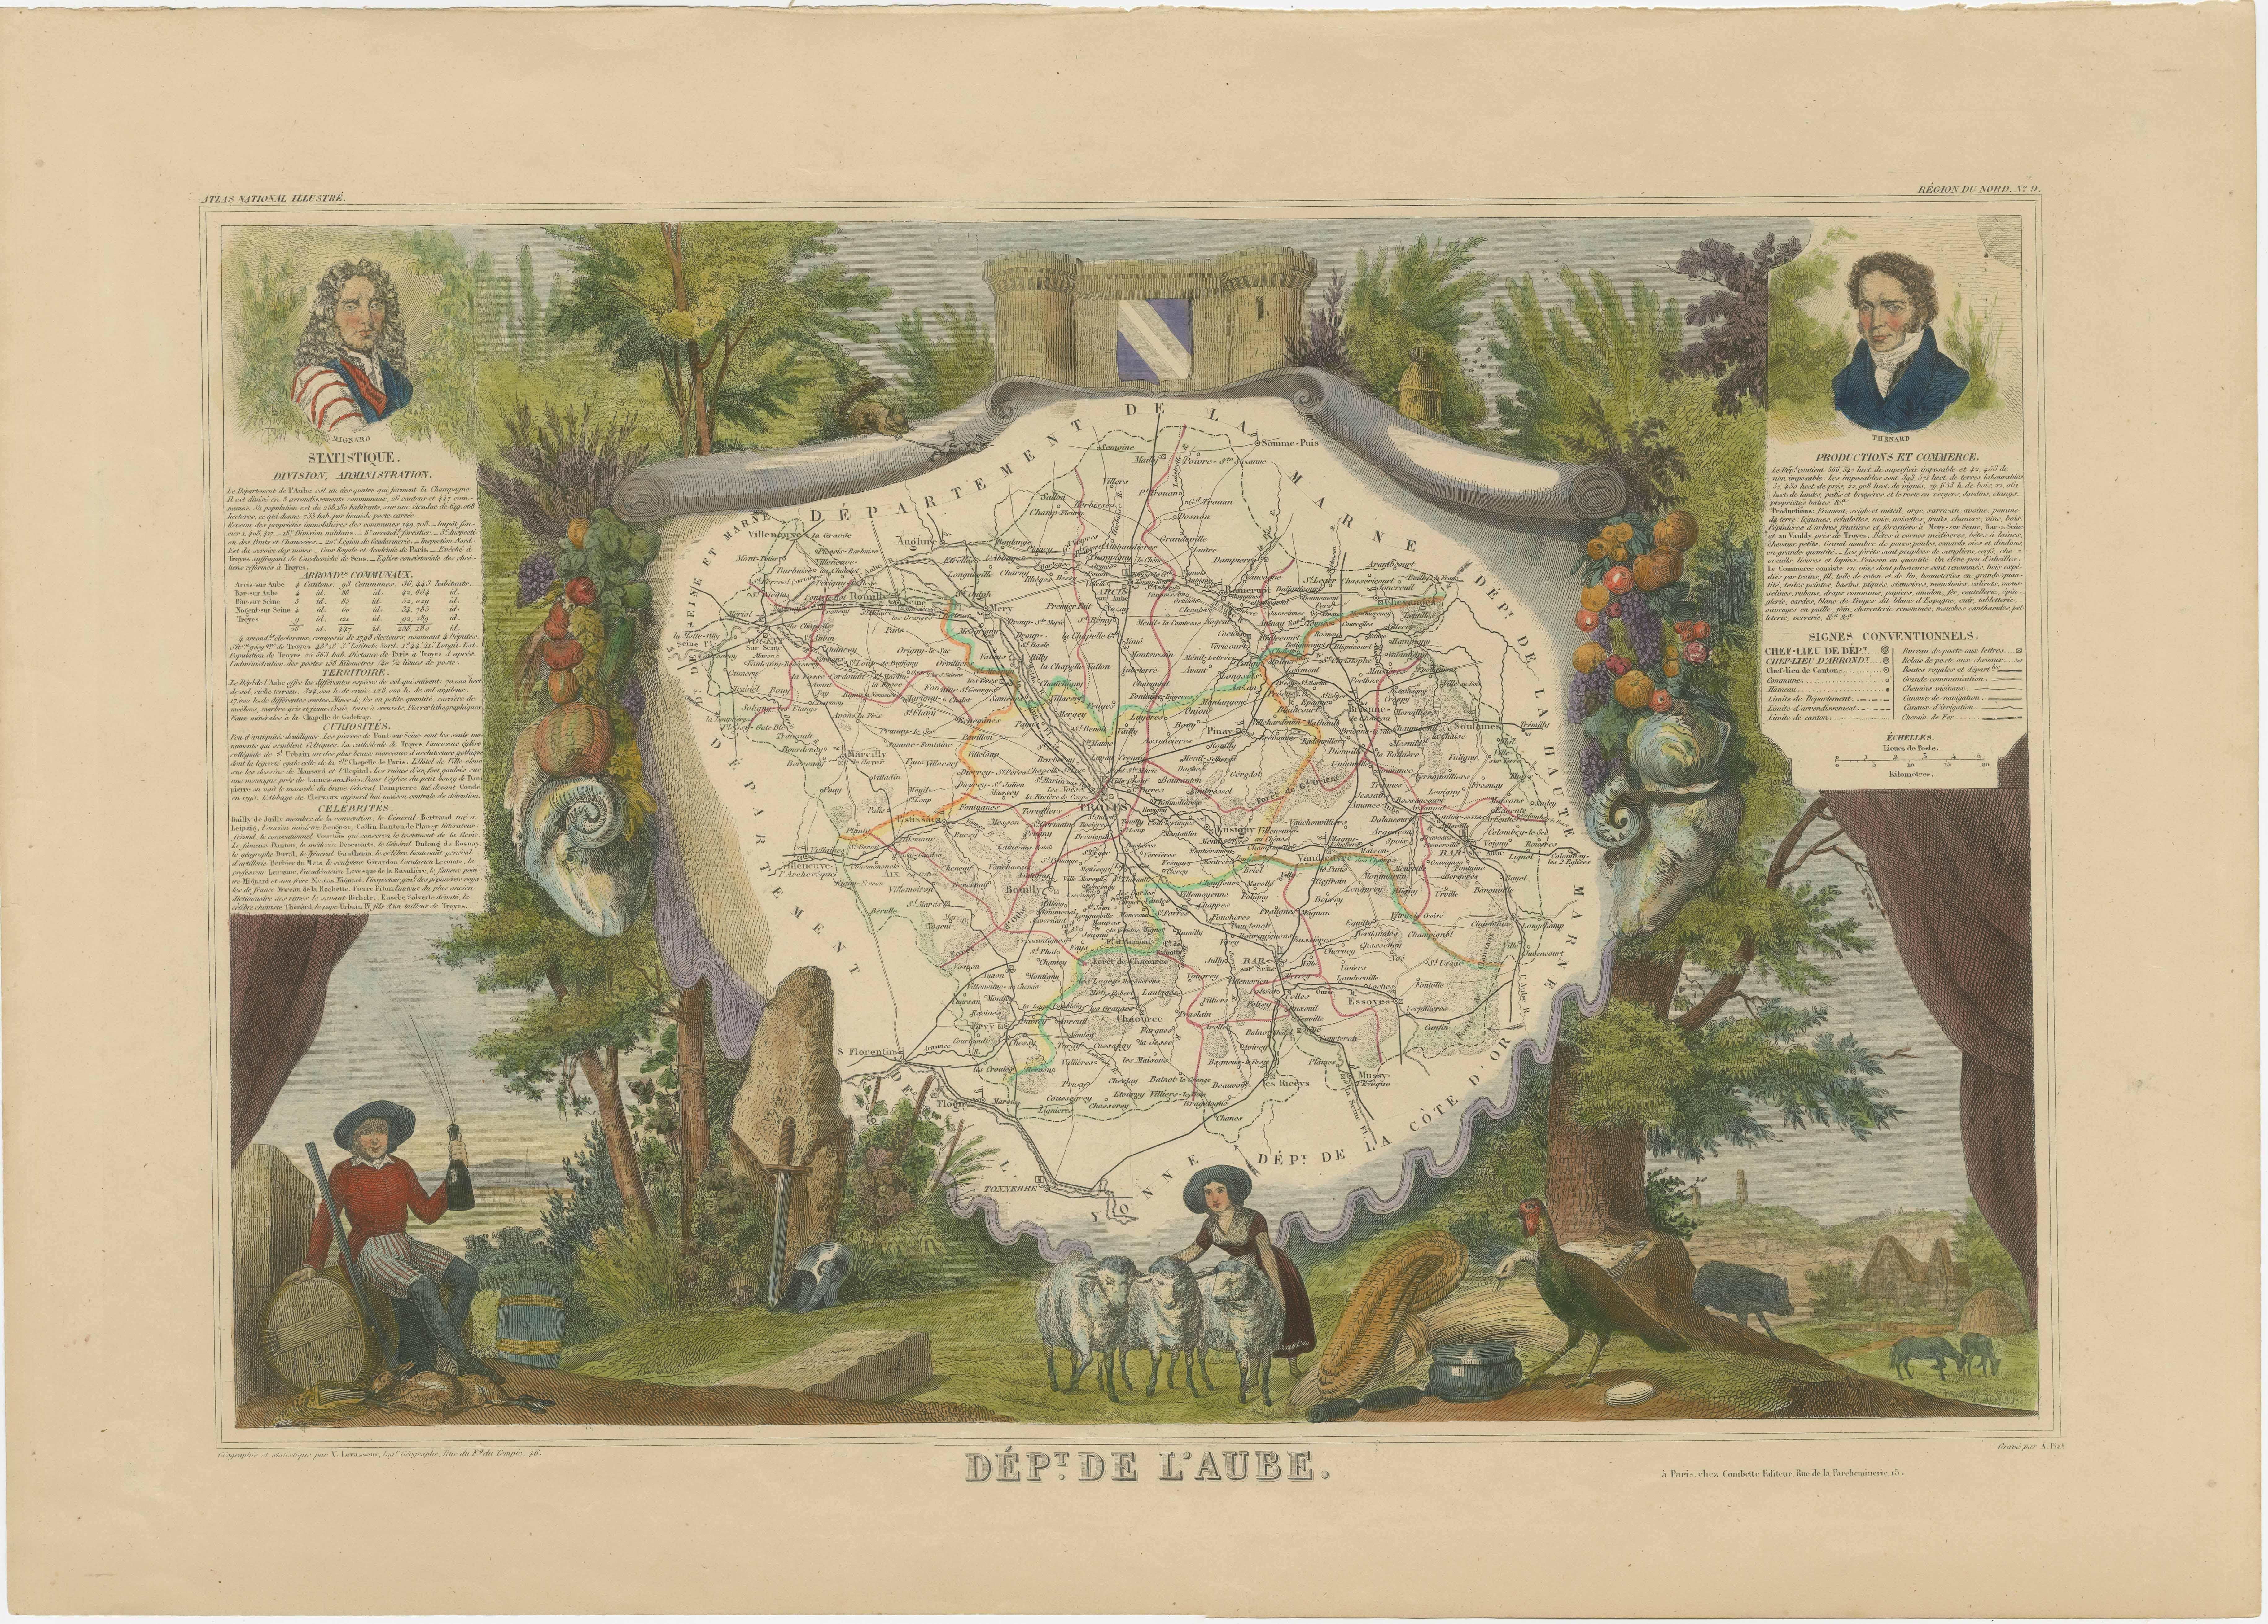 Antique map titled 'Dépt. de l'Aube'. Map of the French department of Aube, France. This area of France is known for its production of Chaource, a soft and salted cheese. Aube is part of France's Champagne region. The whole is surrounded by